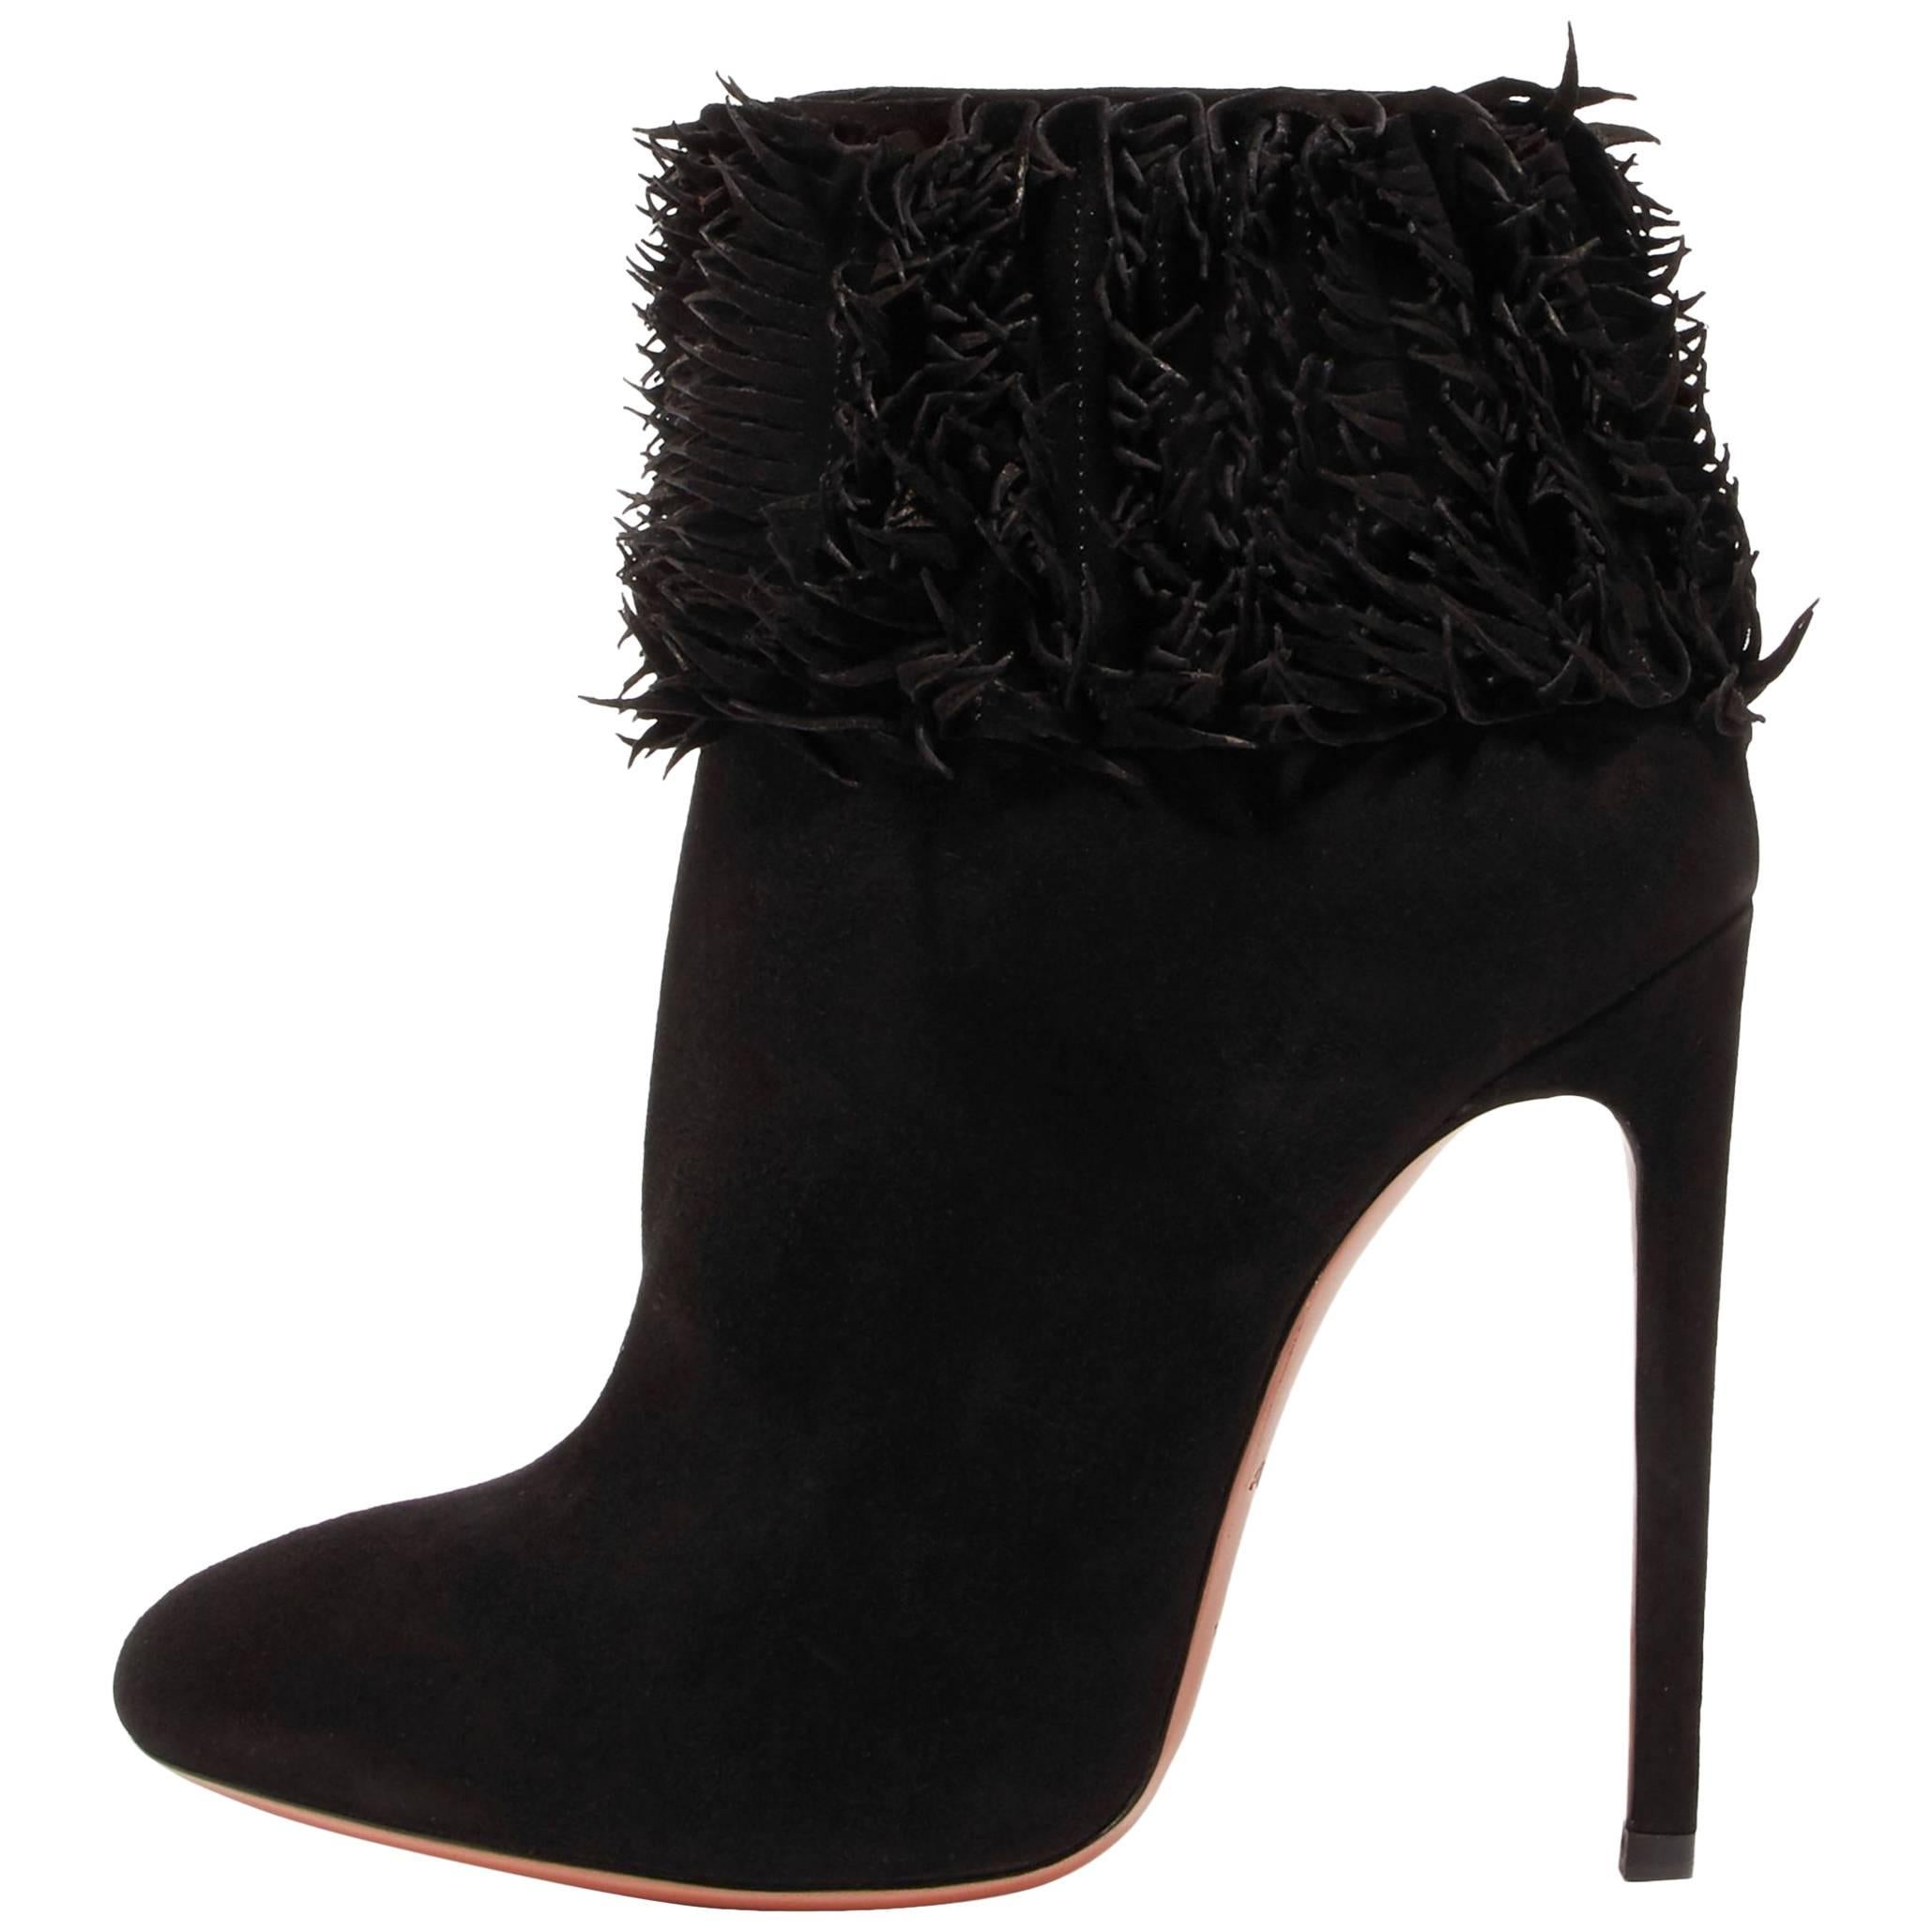 Alaia New Black Suede Ruffle Top Ankle Booties Boots in Box